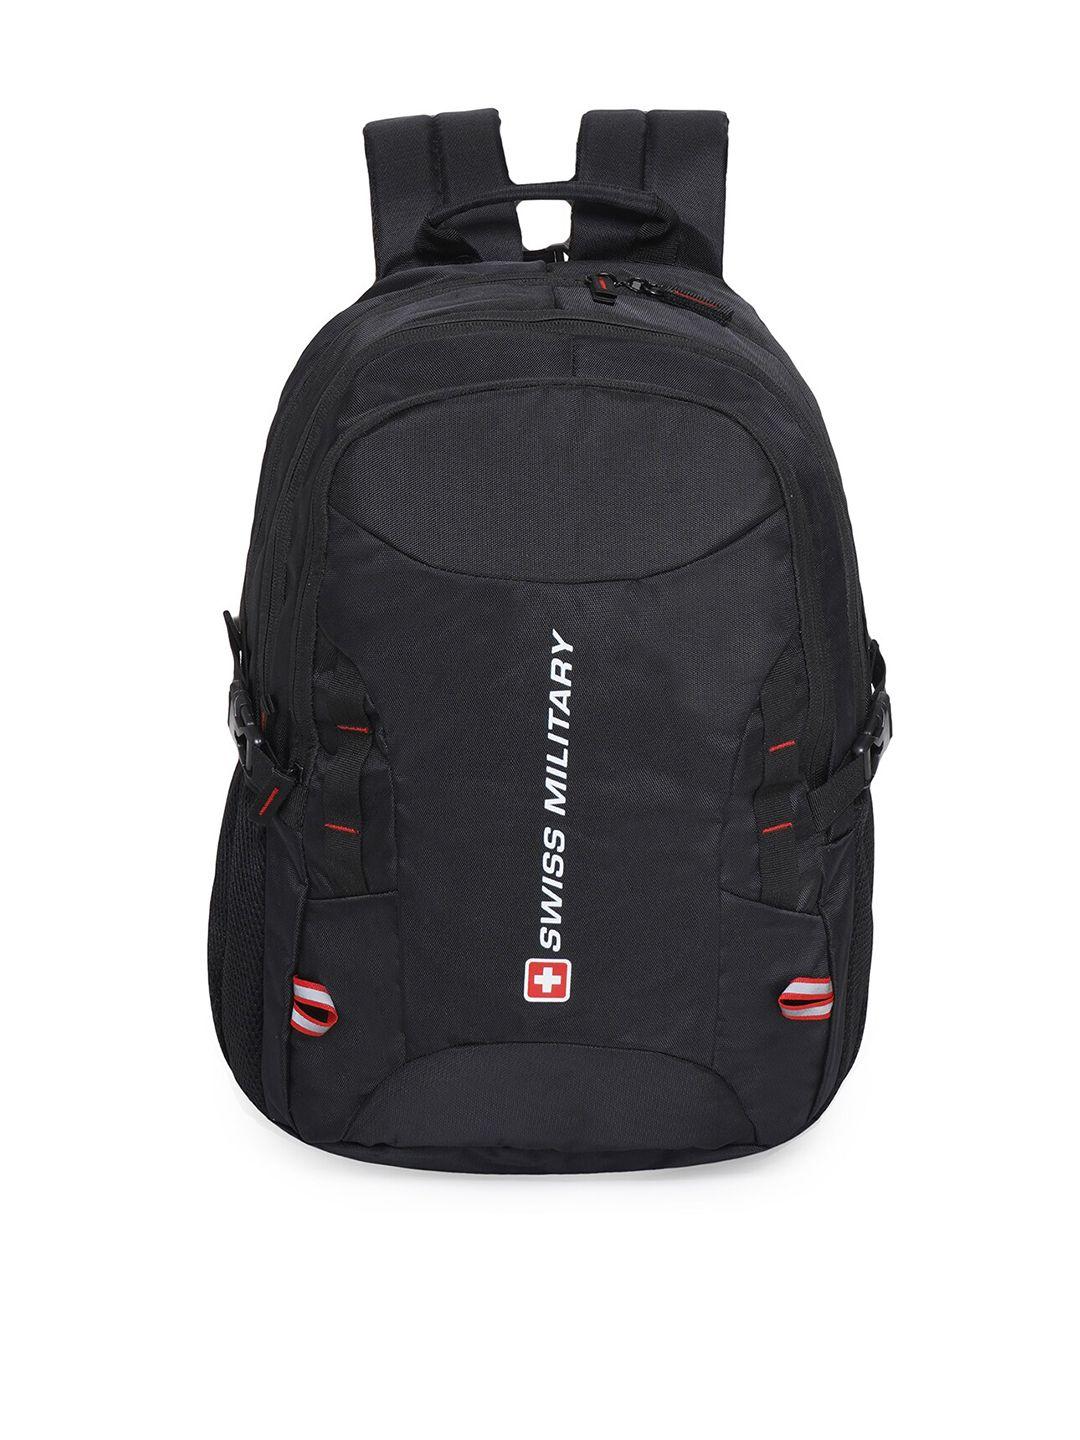 swiss military water resistant laptop backpack with rain cover